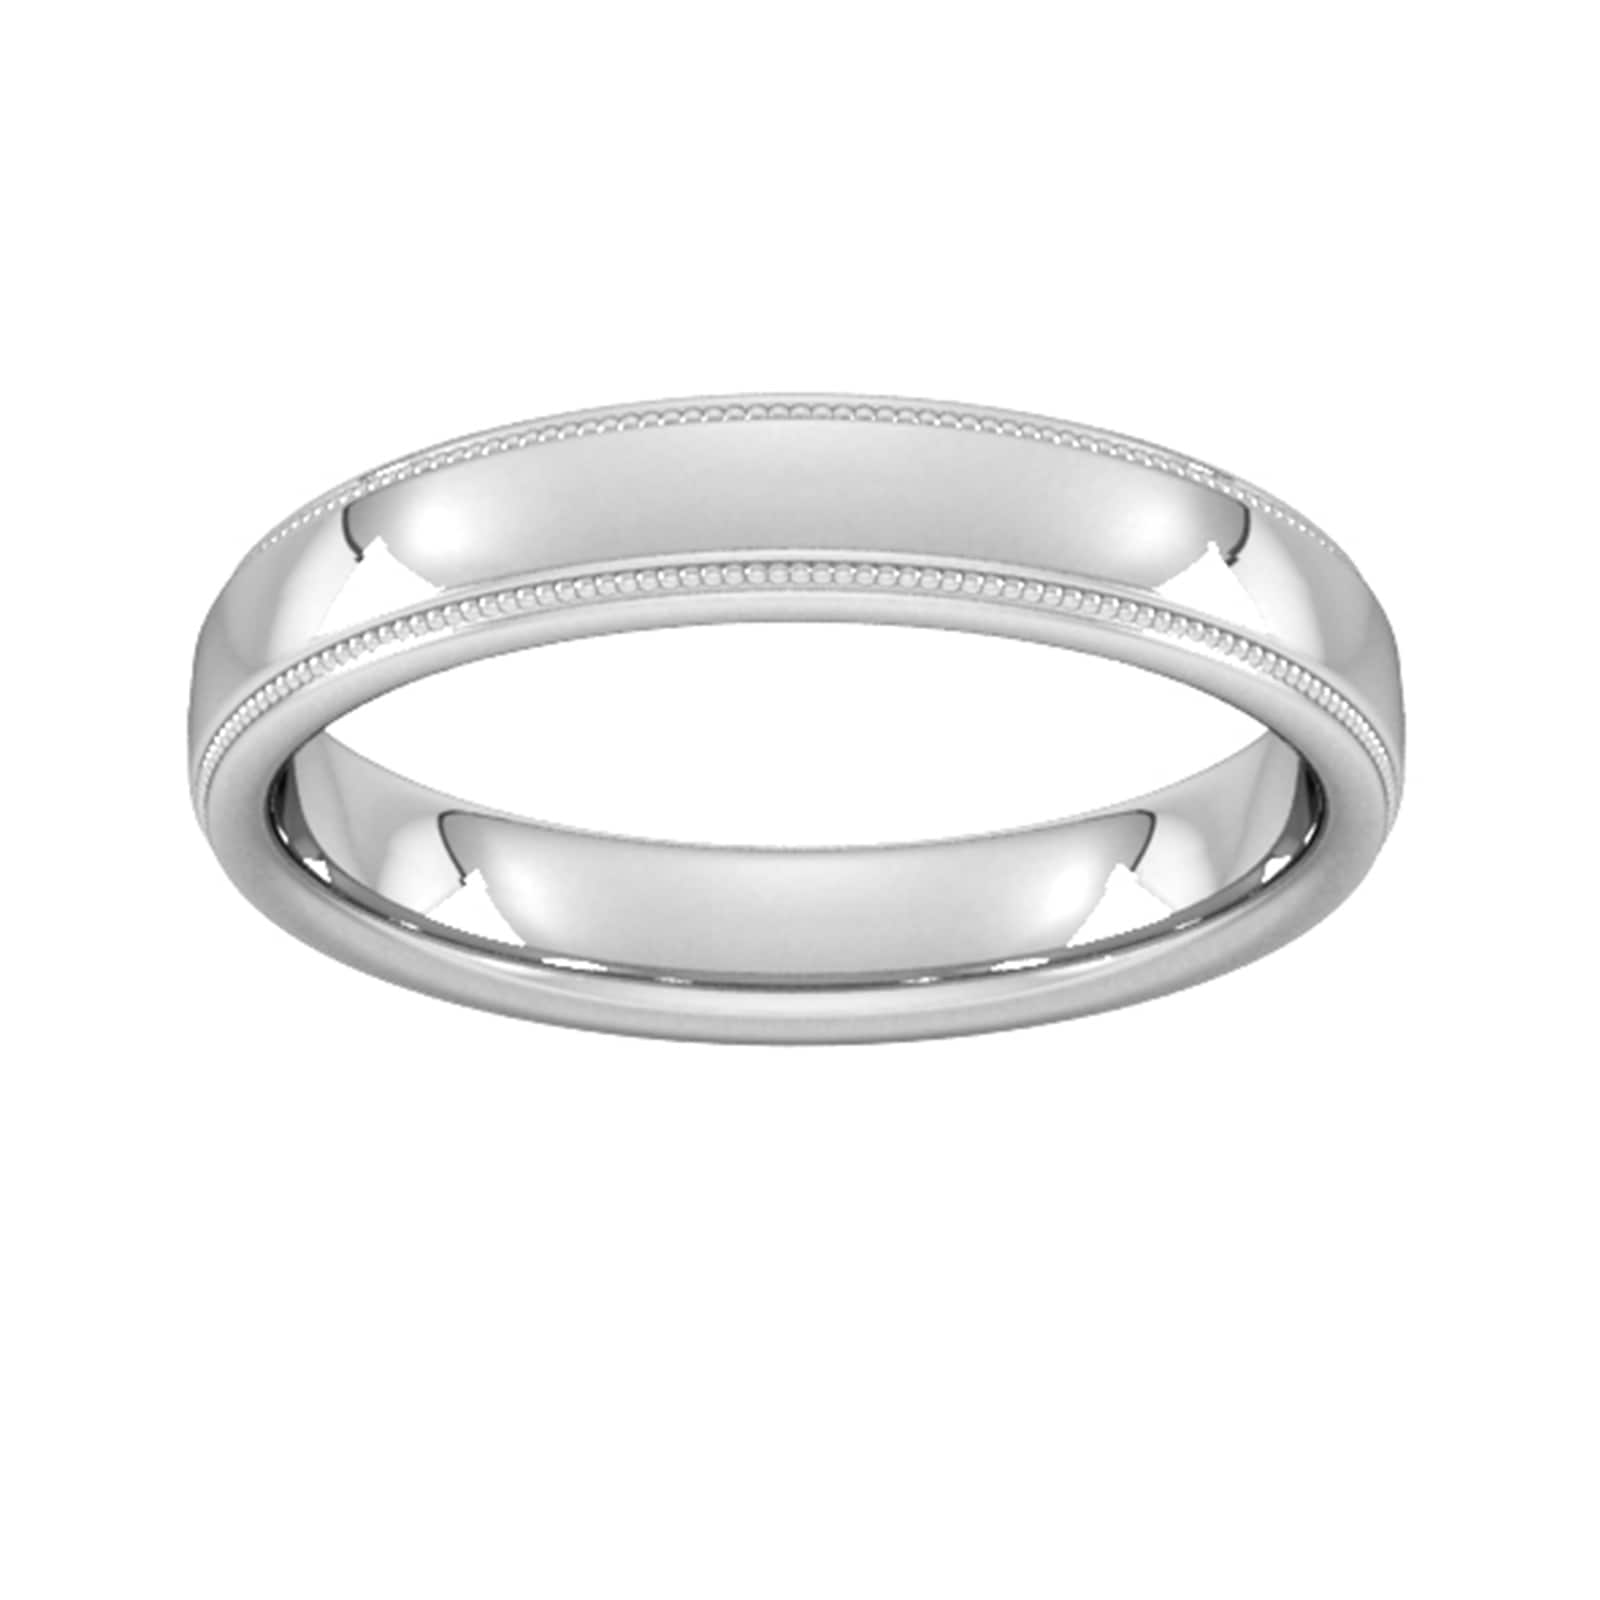 4mm Traditional Court Heavy Milgrain Edge Wedding Ring In 18 Carat White Gold - Ring Size Q